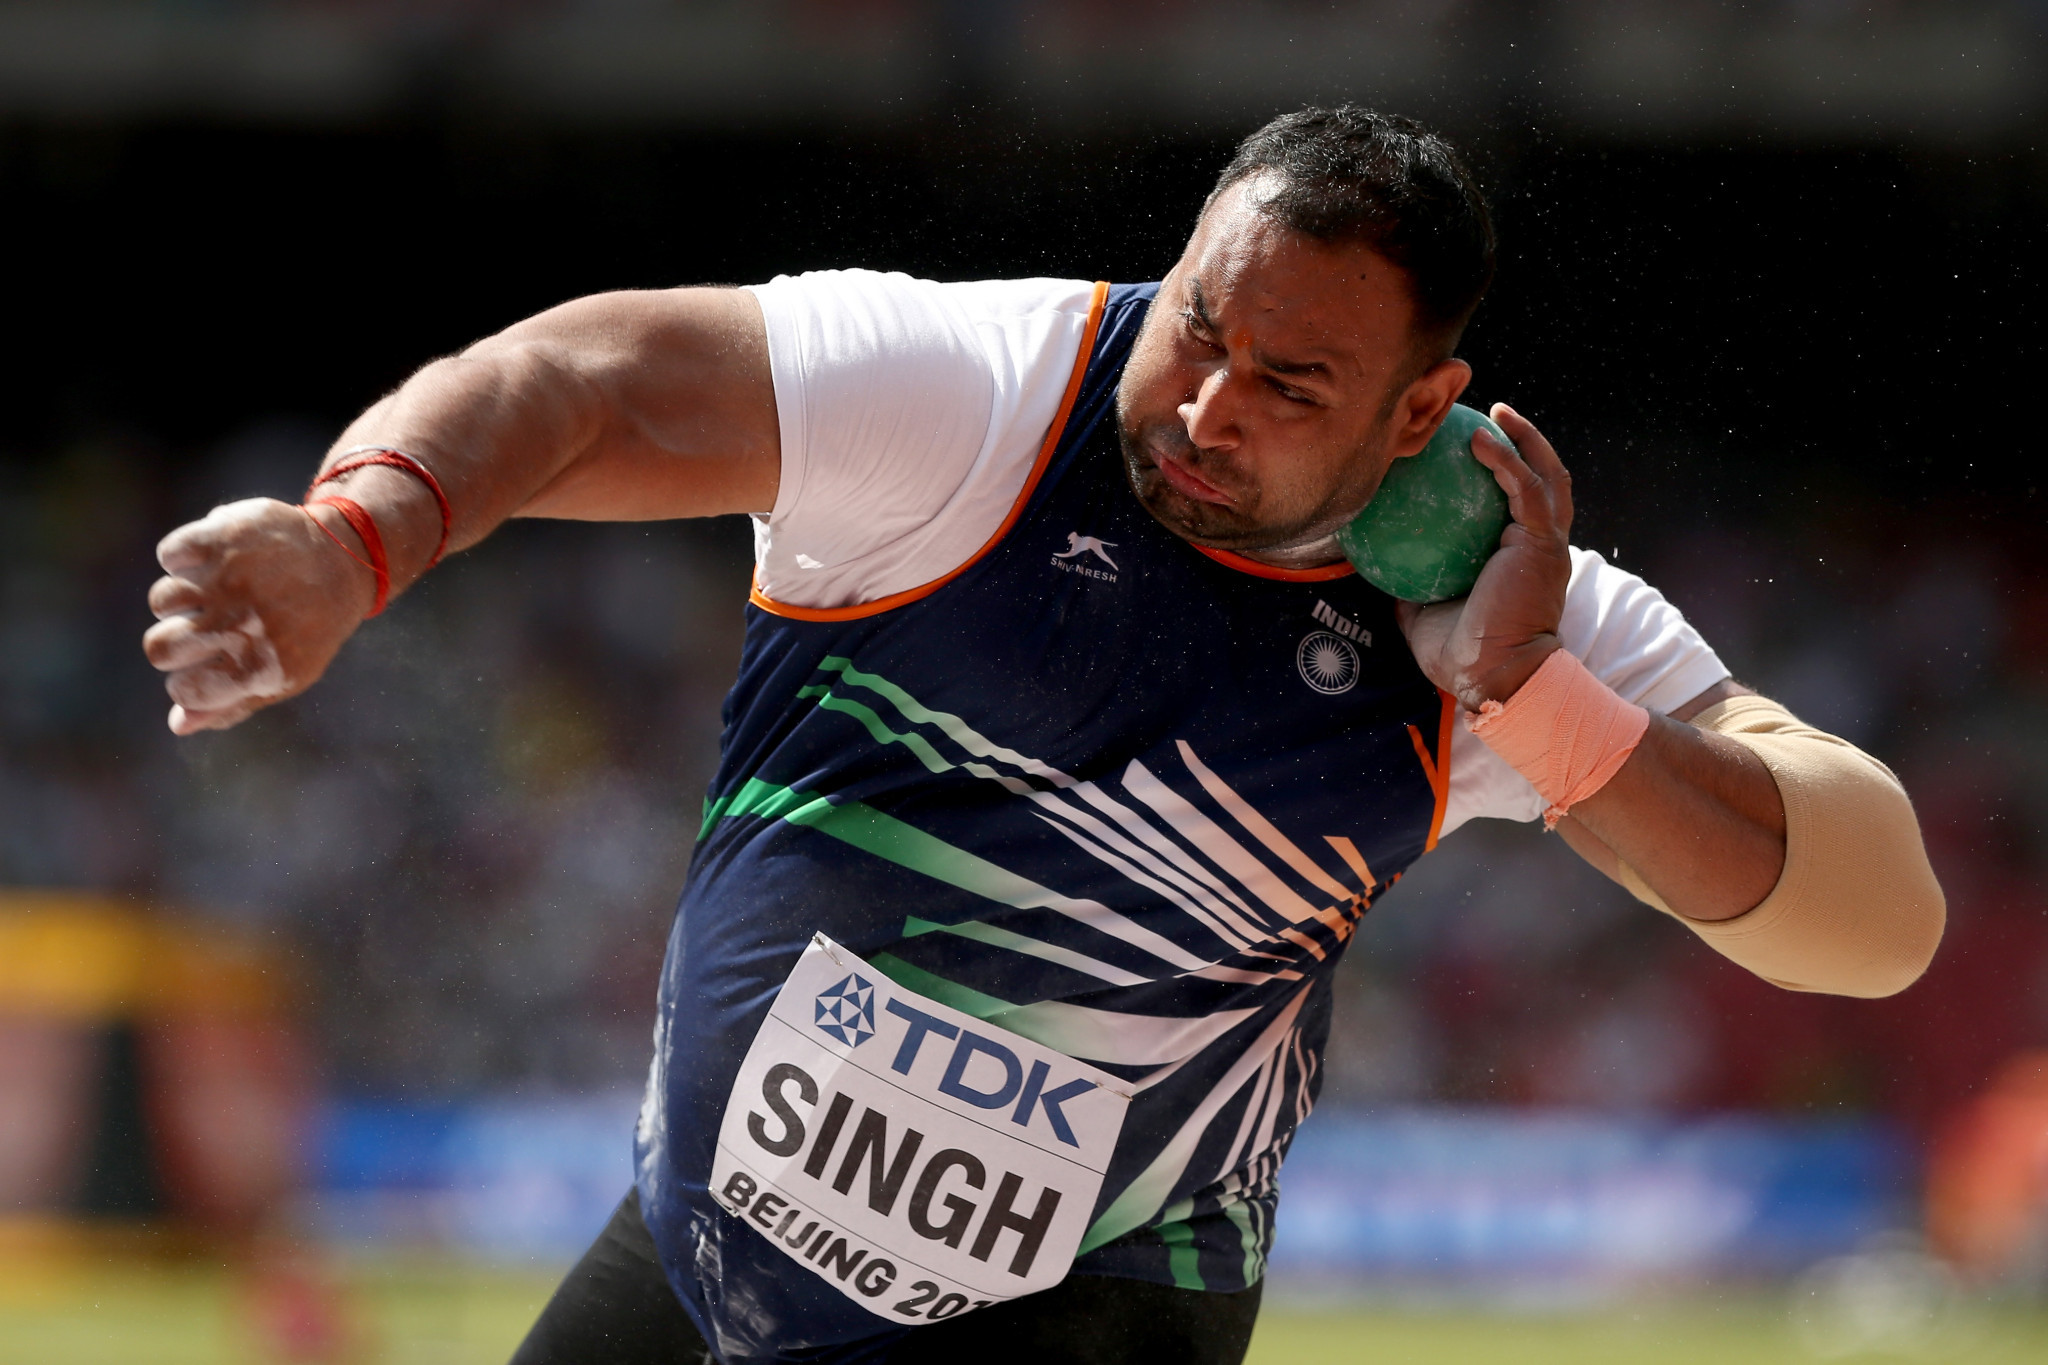 Indian shot putter has four-year doping ban upheld despite serious concerns over testing process